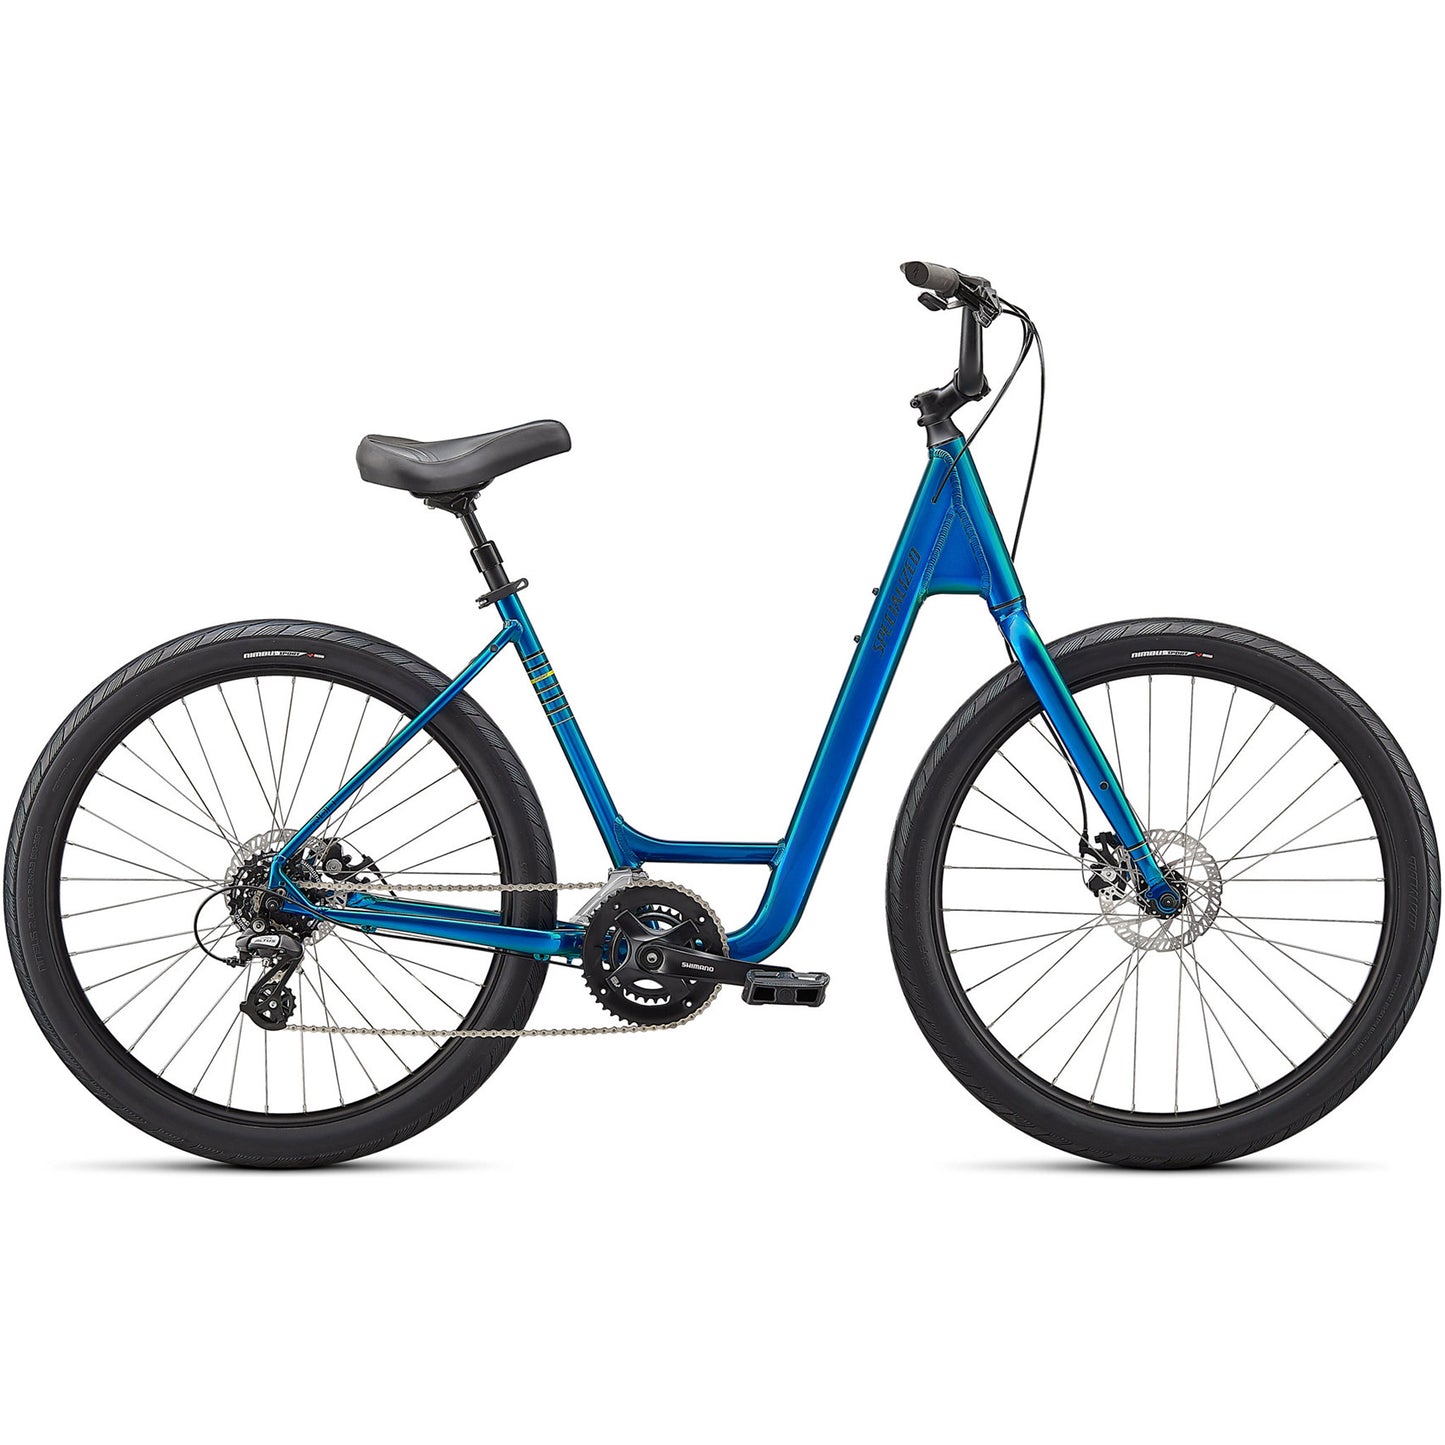 Specialized Roll Sport Low Entry Unisex Fitness Bike - Gloss Teal Tint